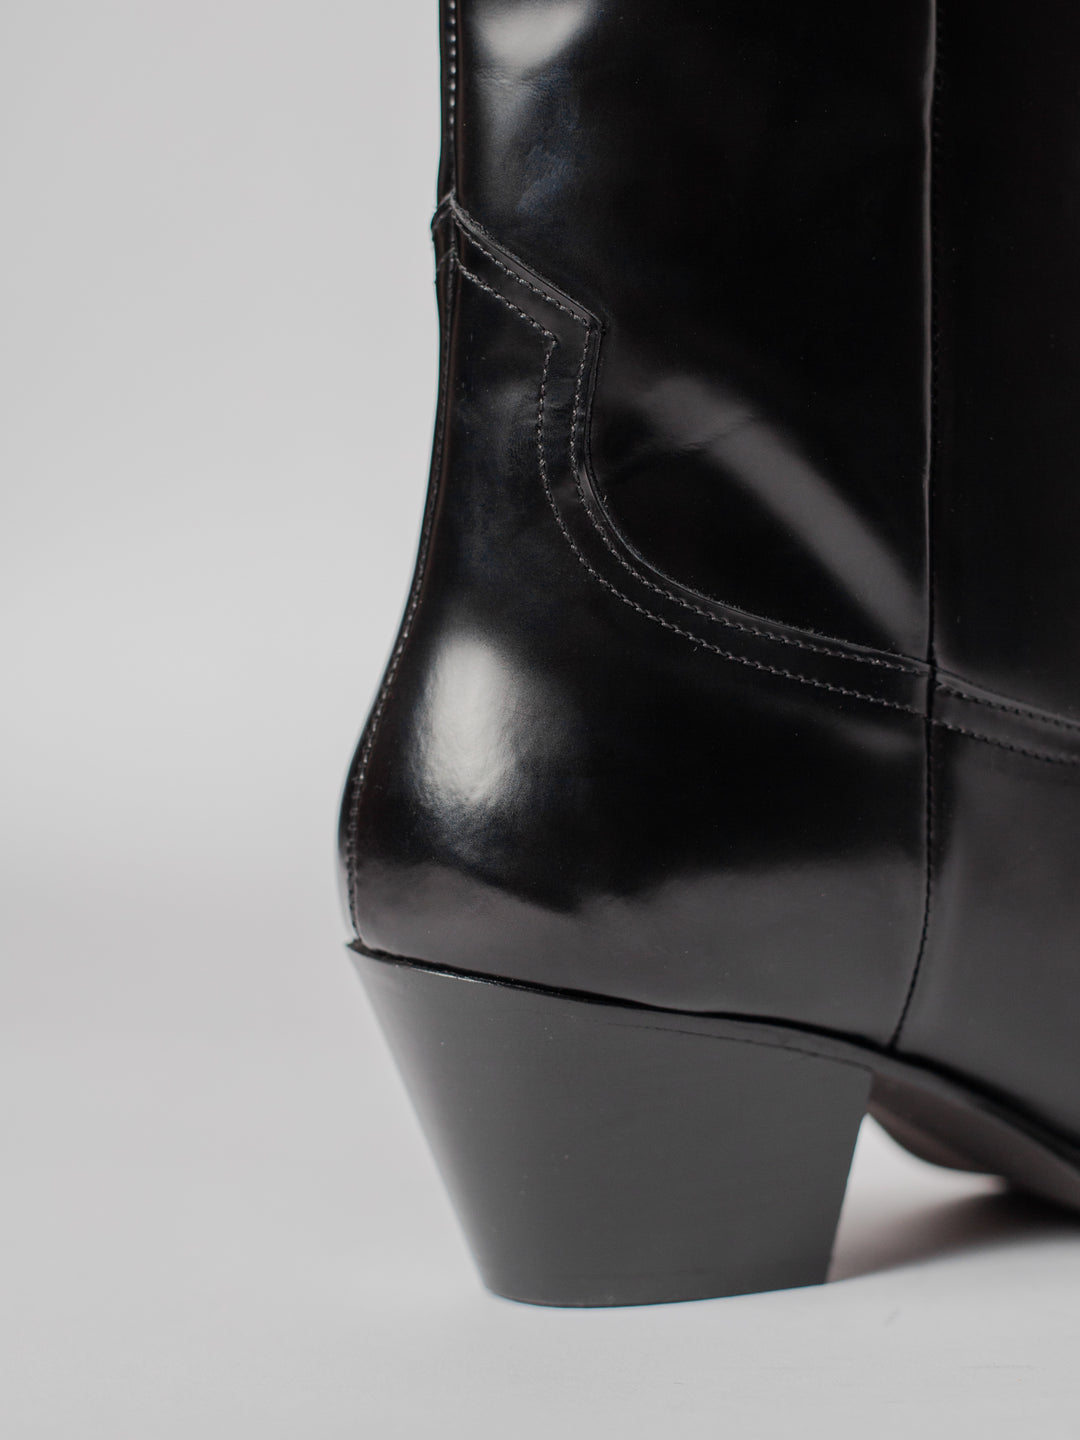 Blankens The Sedona cowboy boot in black leather with pointed toe. Comfortable heel. Fall winter boots.  Detail photo of heel